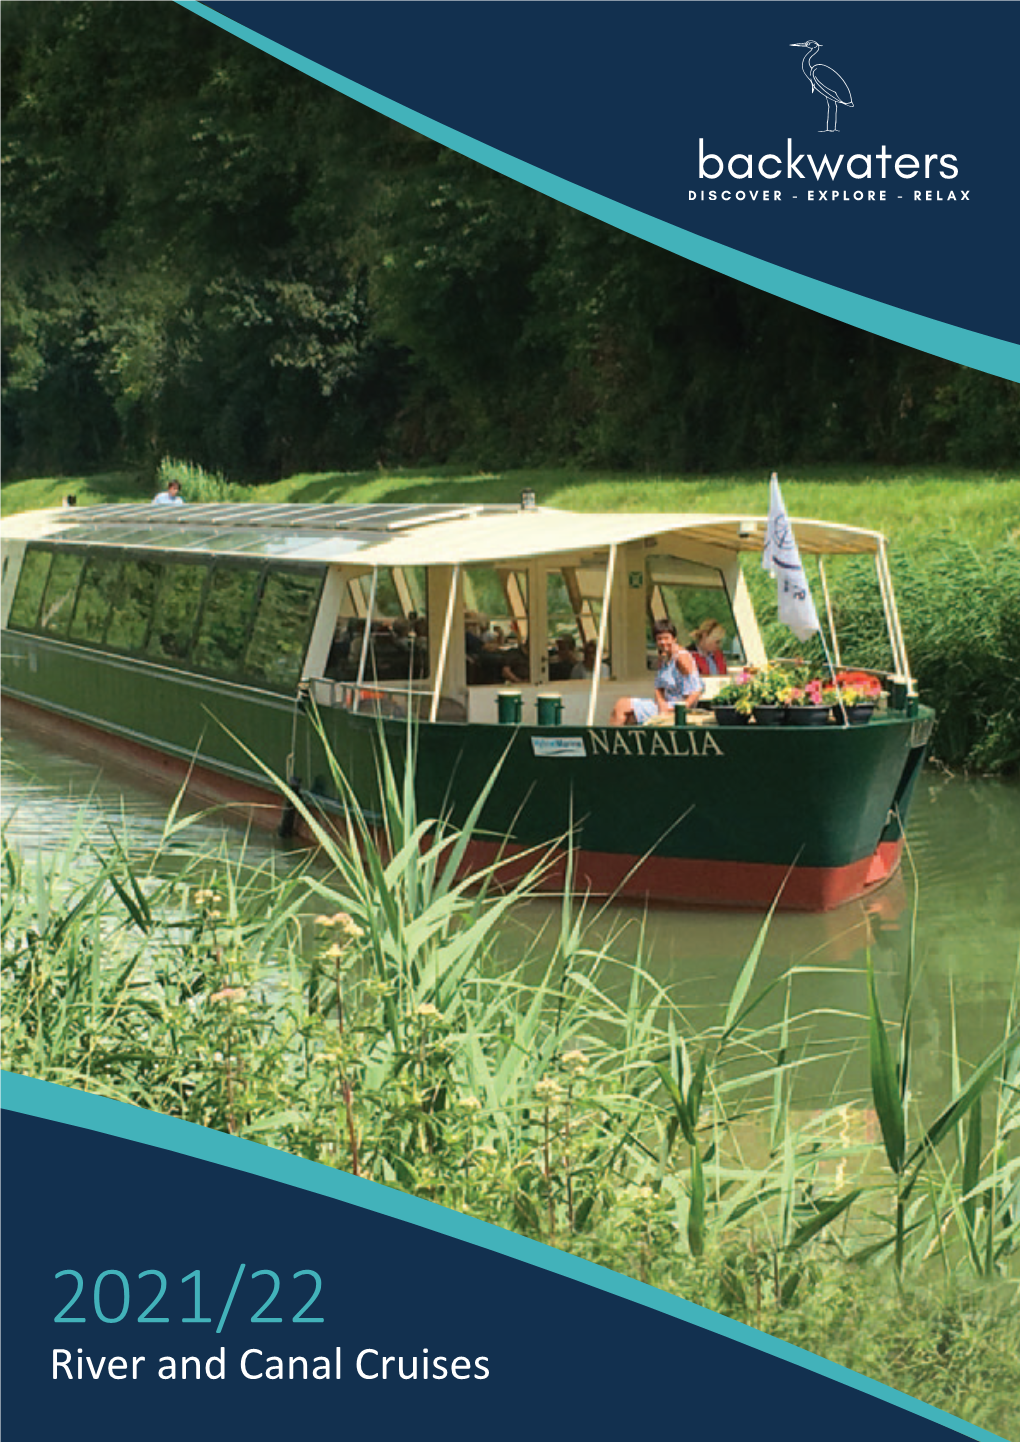 River and Canal Cruises Welcome! Welcome to Backwaters’ 2021/22 Brochure